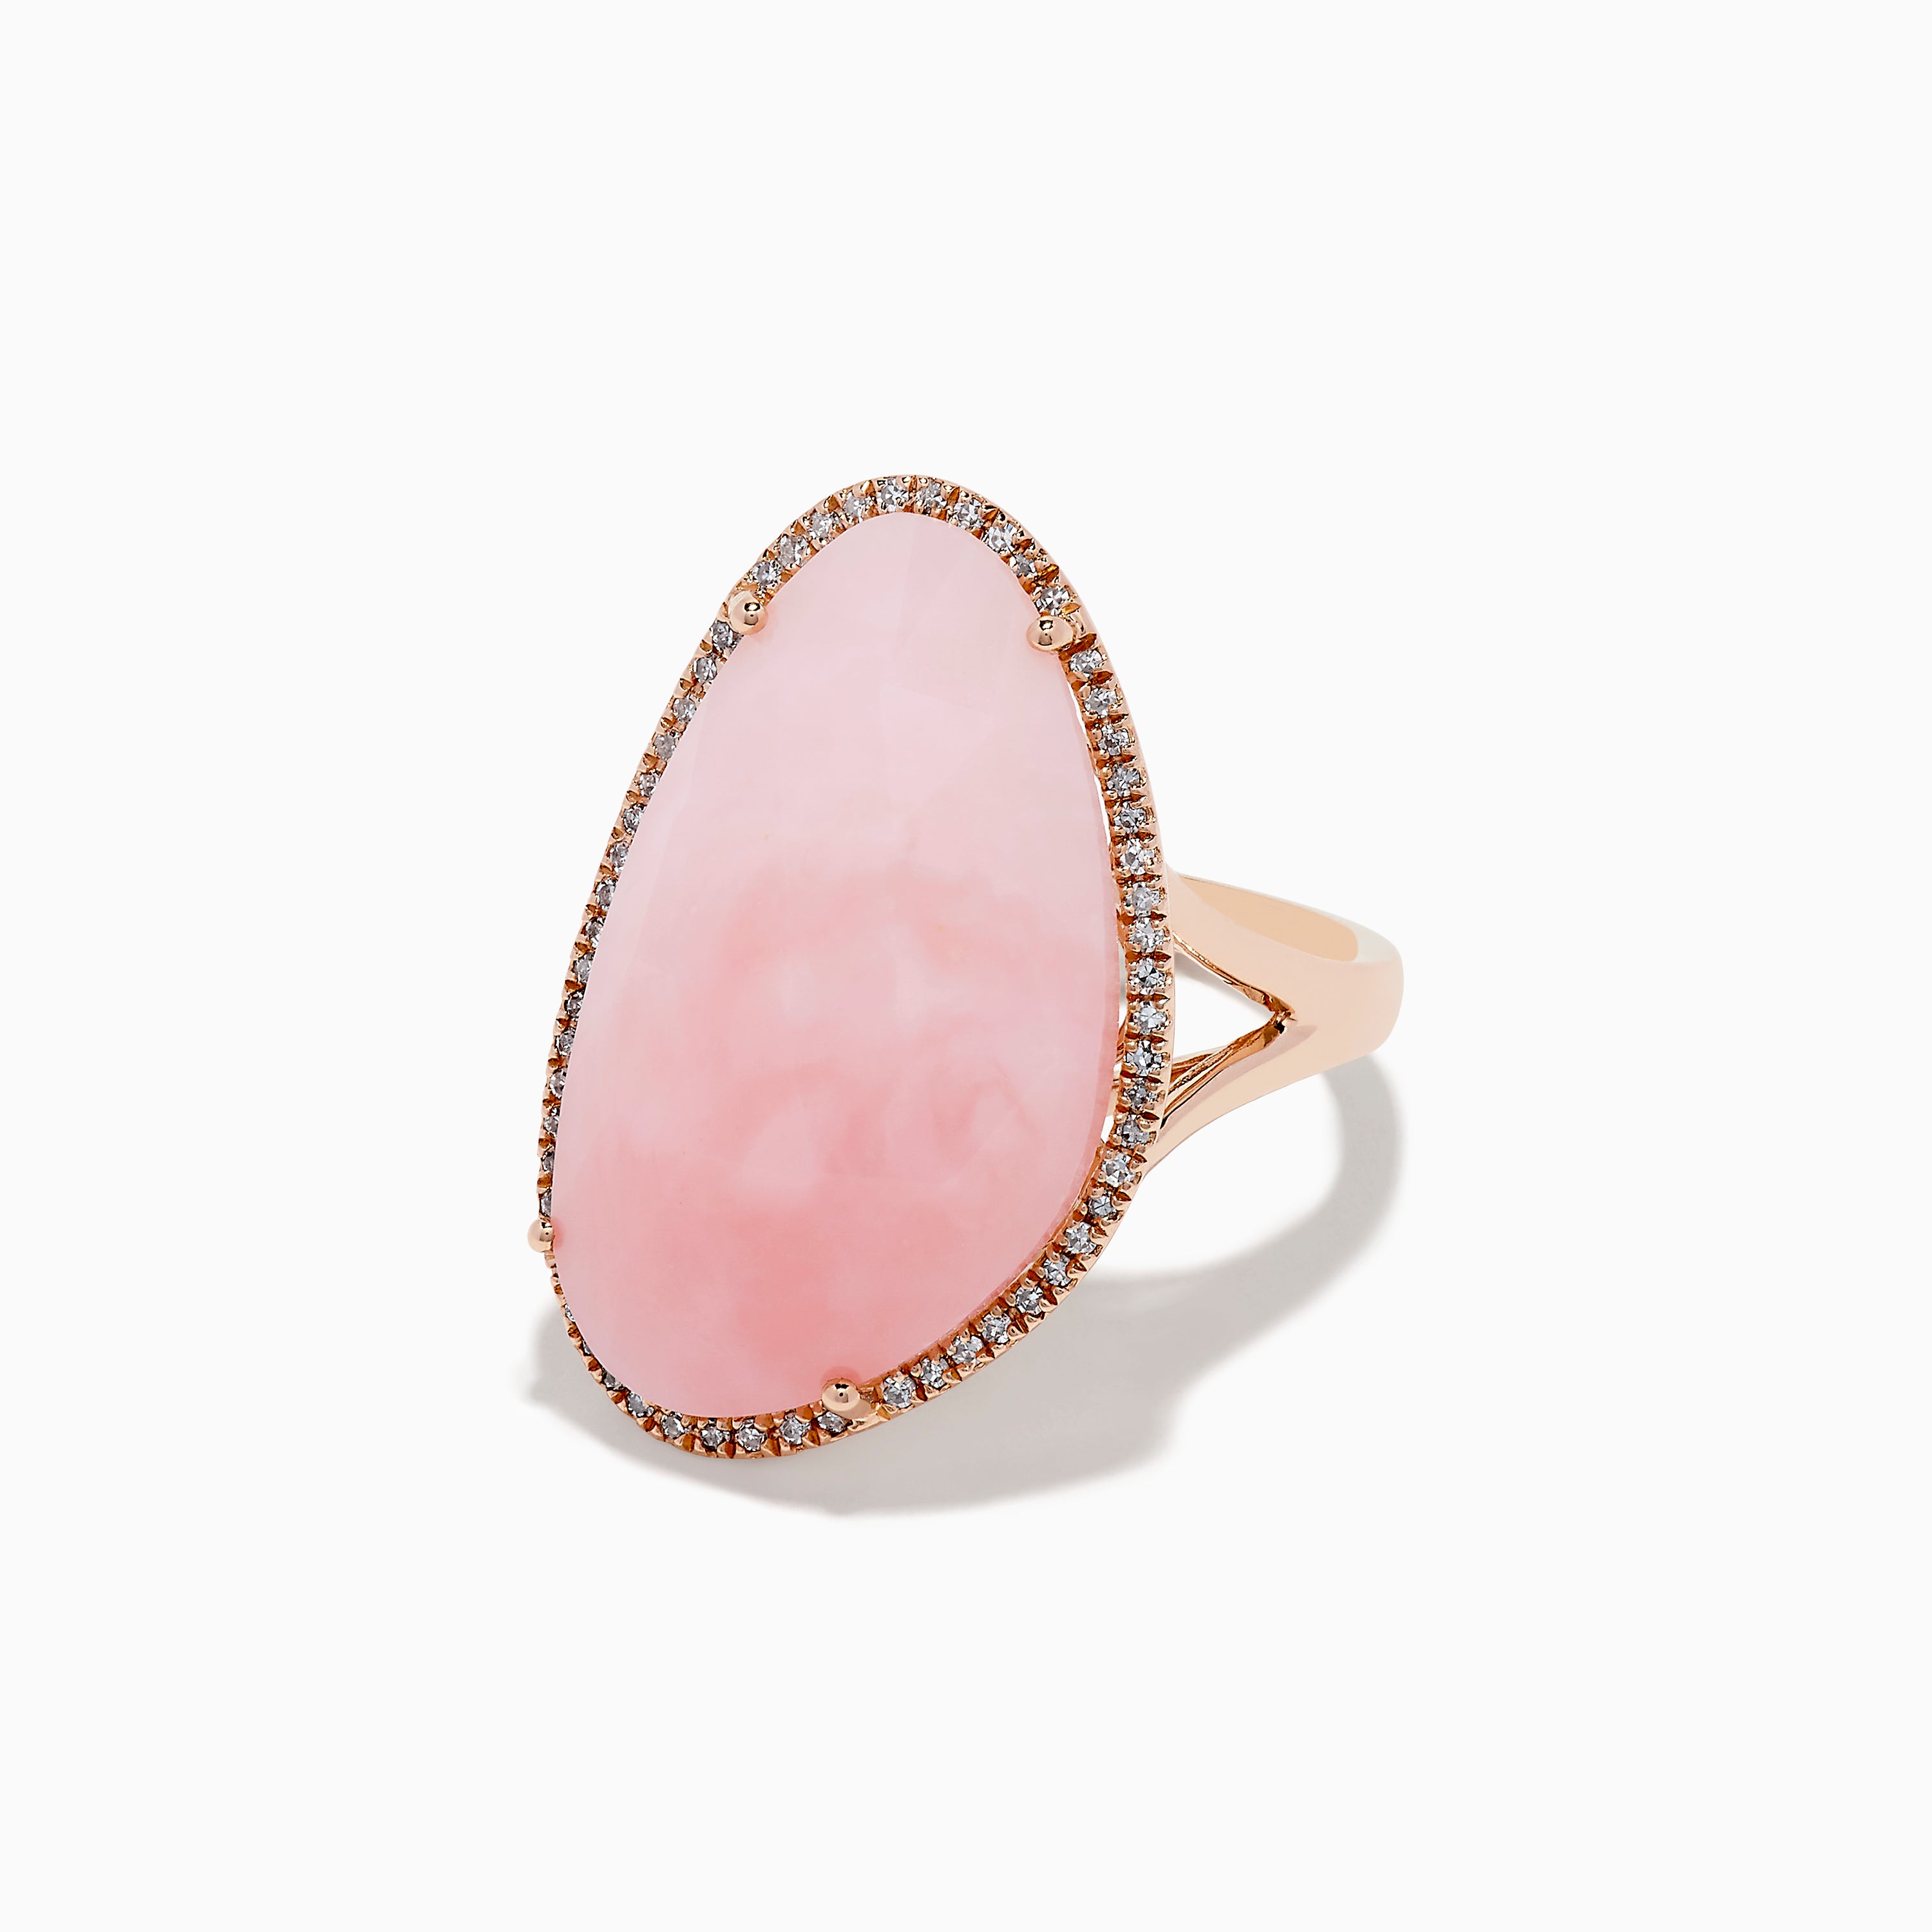 Effy 14K Rose Gold Pink Opal and Diamond Ring